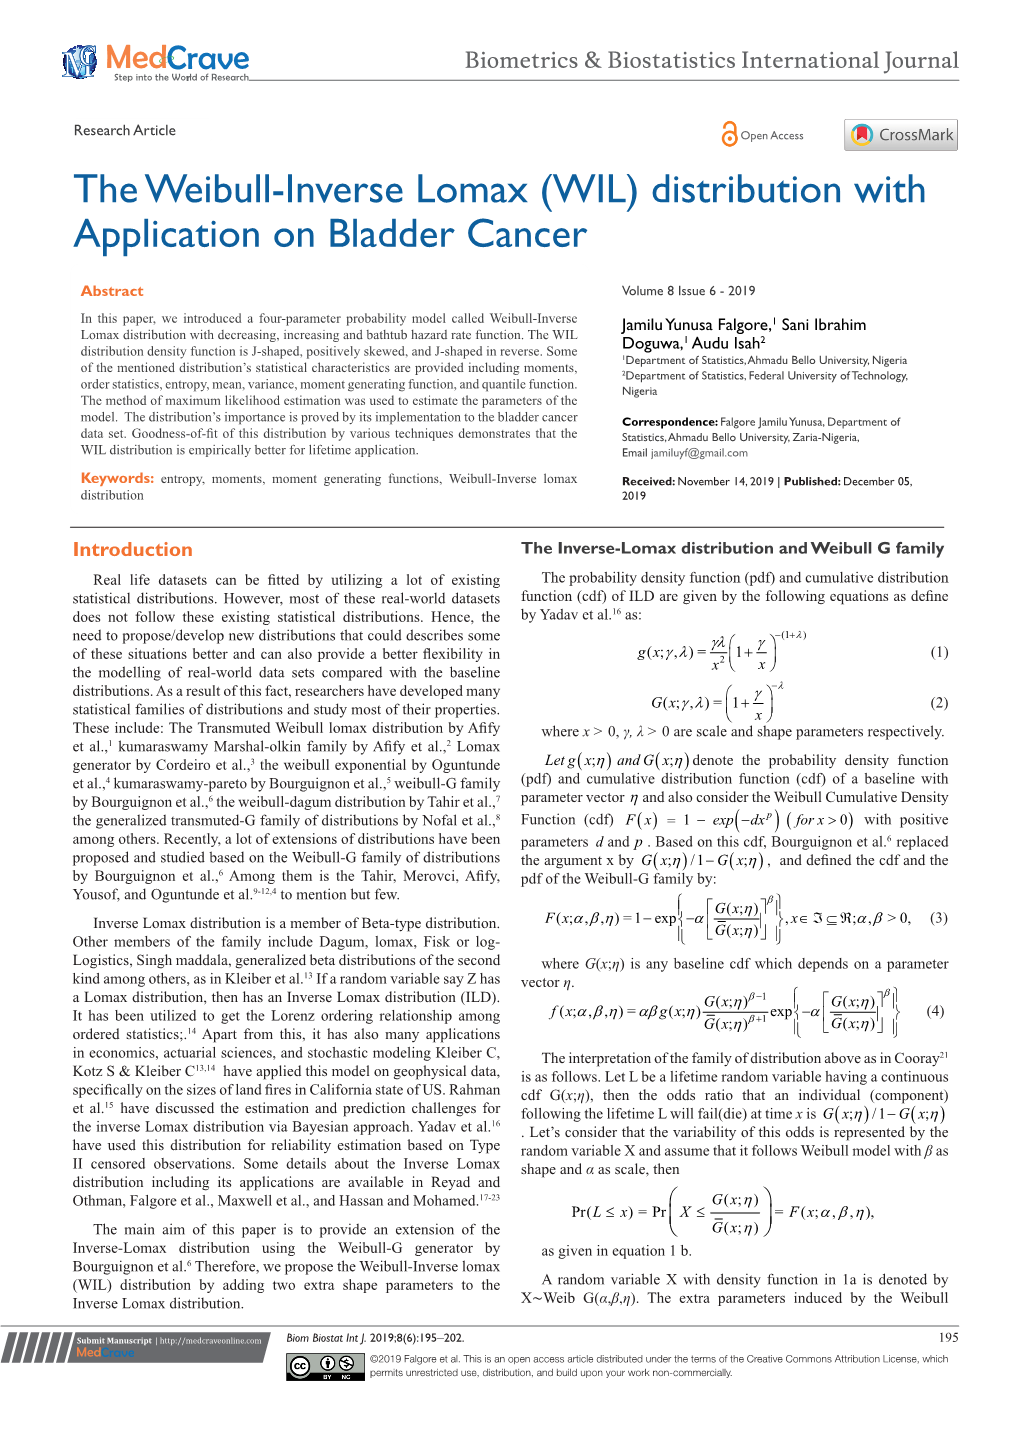 The Weibull-Inverse Lomax (WIL) Distribution with Application on Bladder Cancer